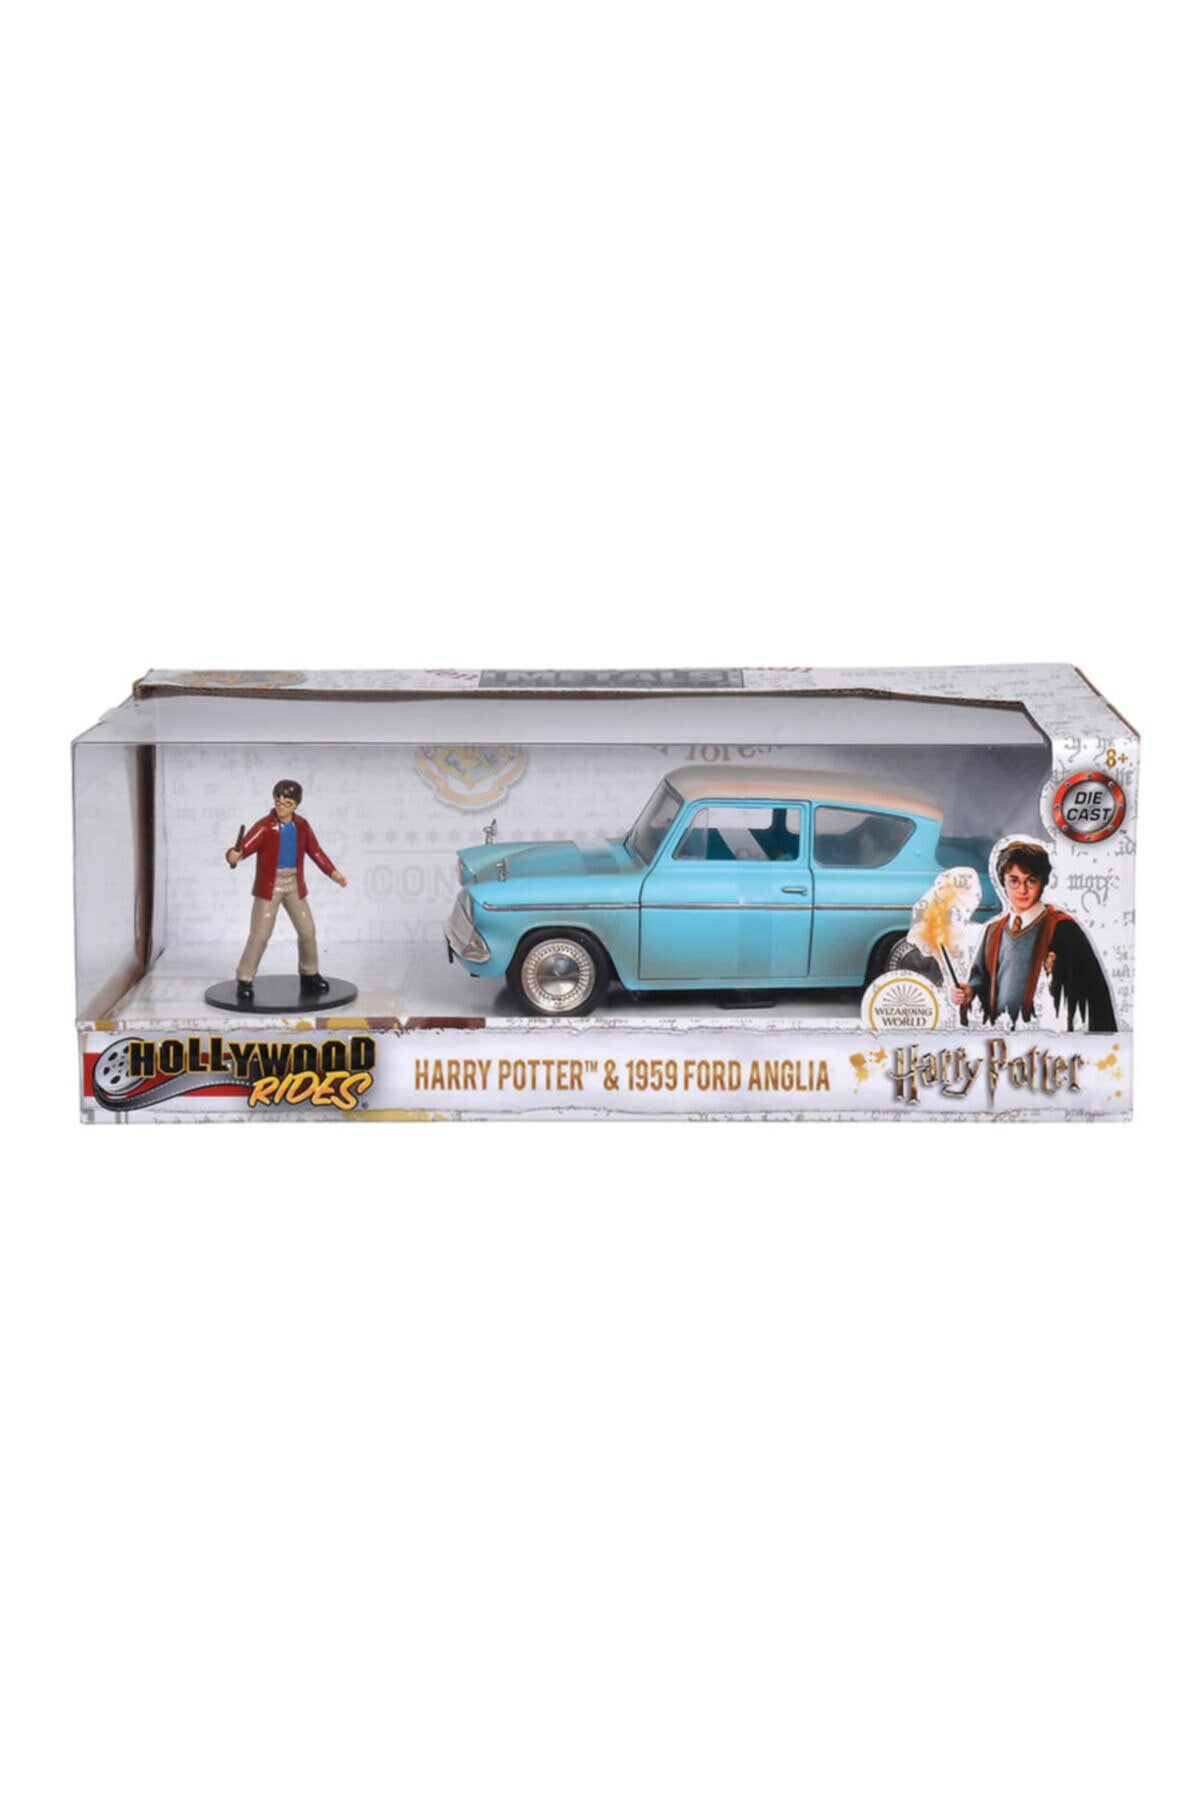 Harry Potter 1959 Ford Anglia 1 24